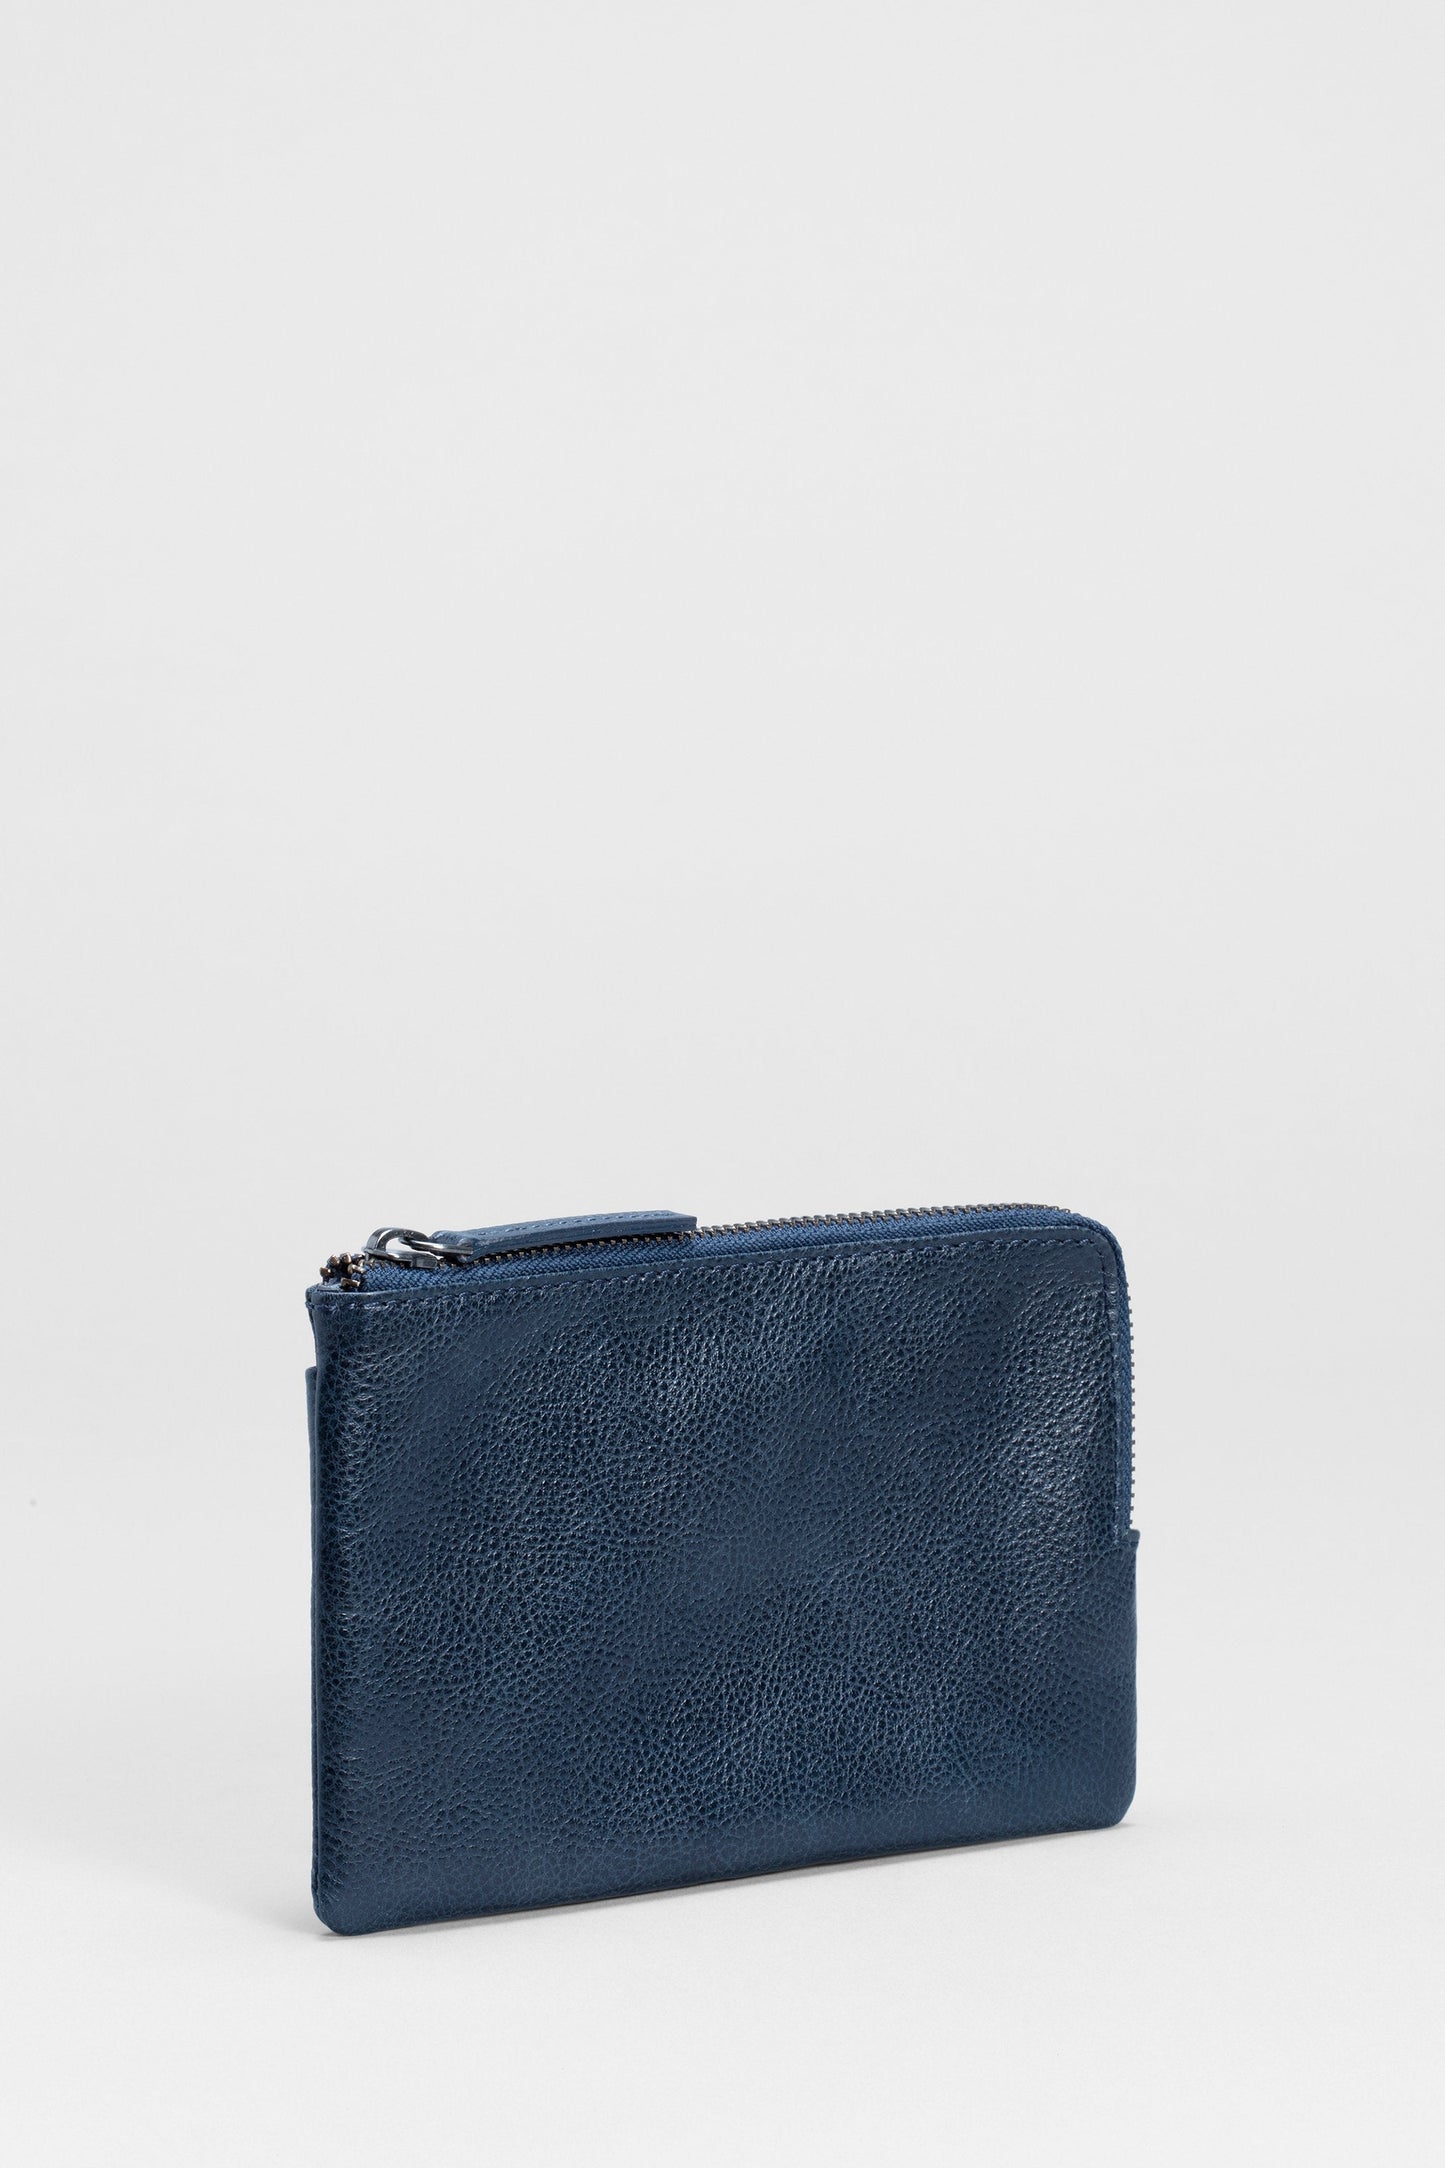 Kaia Zip Remnant Cow Leather Coin Purse Pouch Front | NAVY